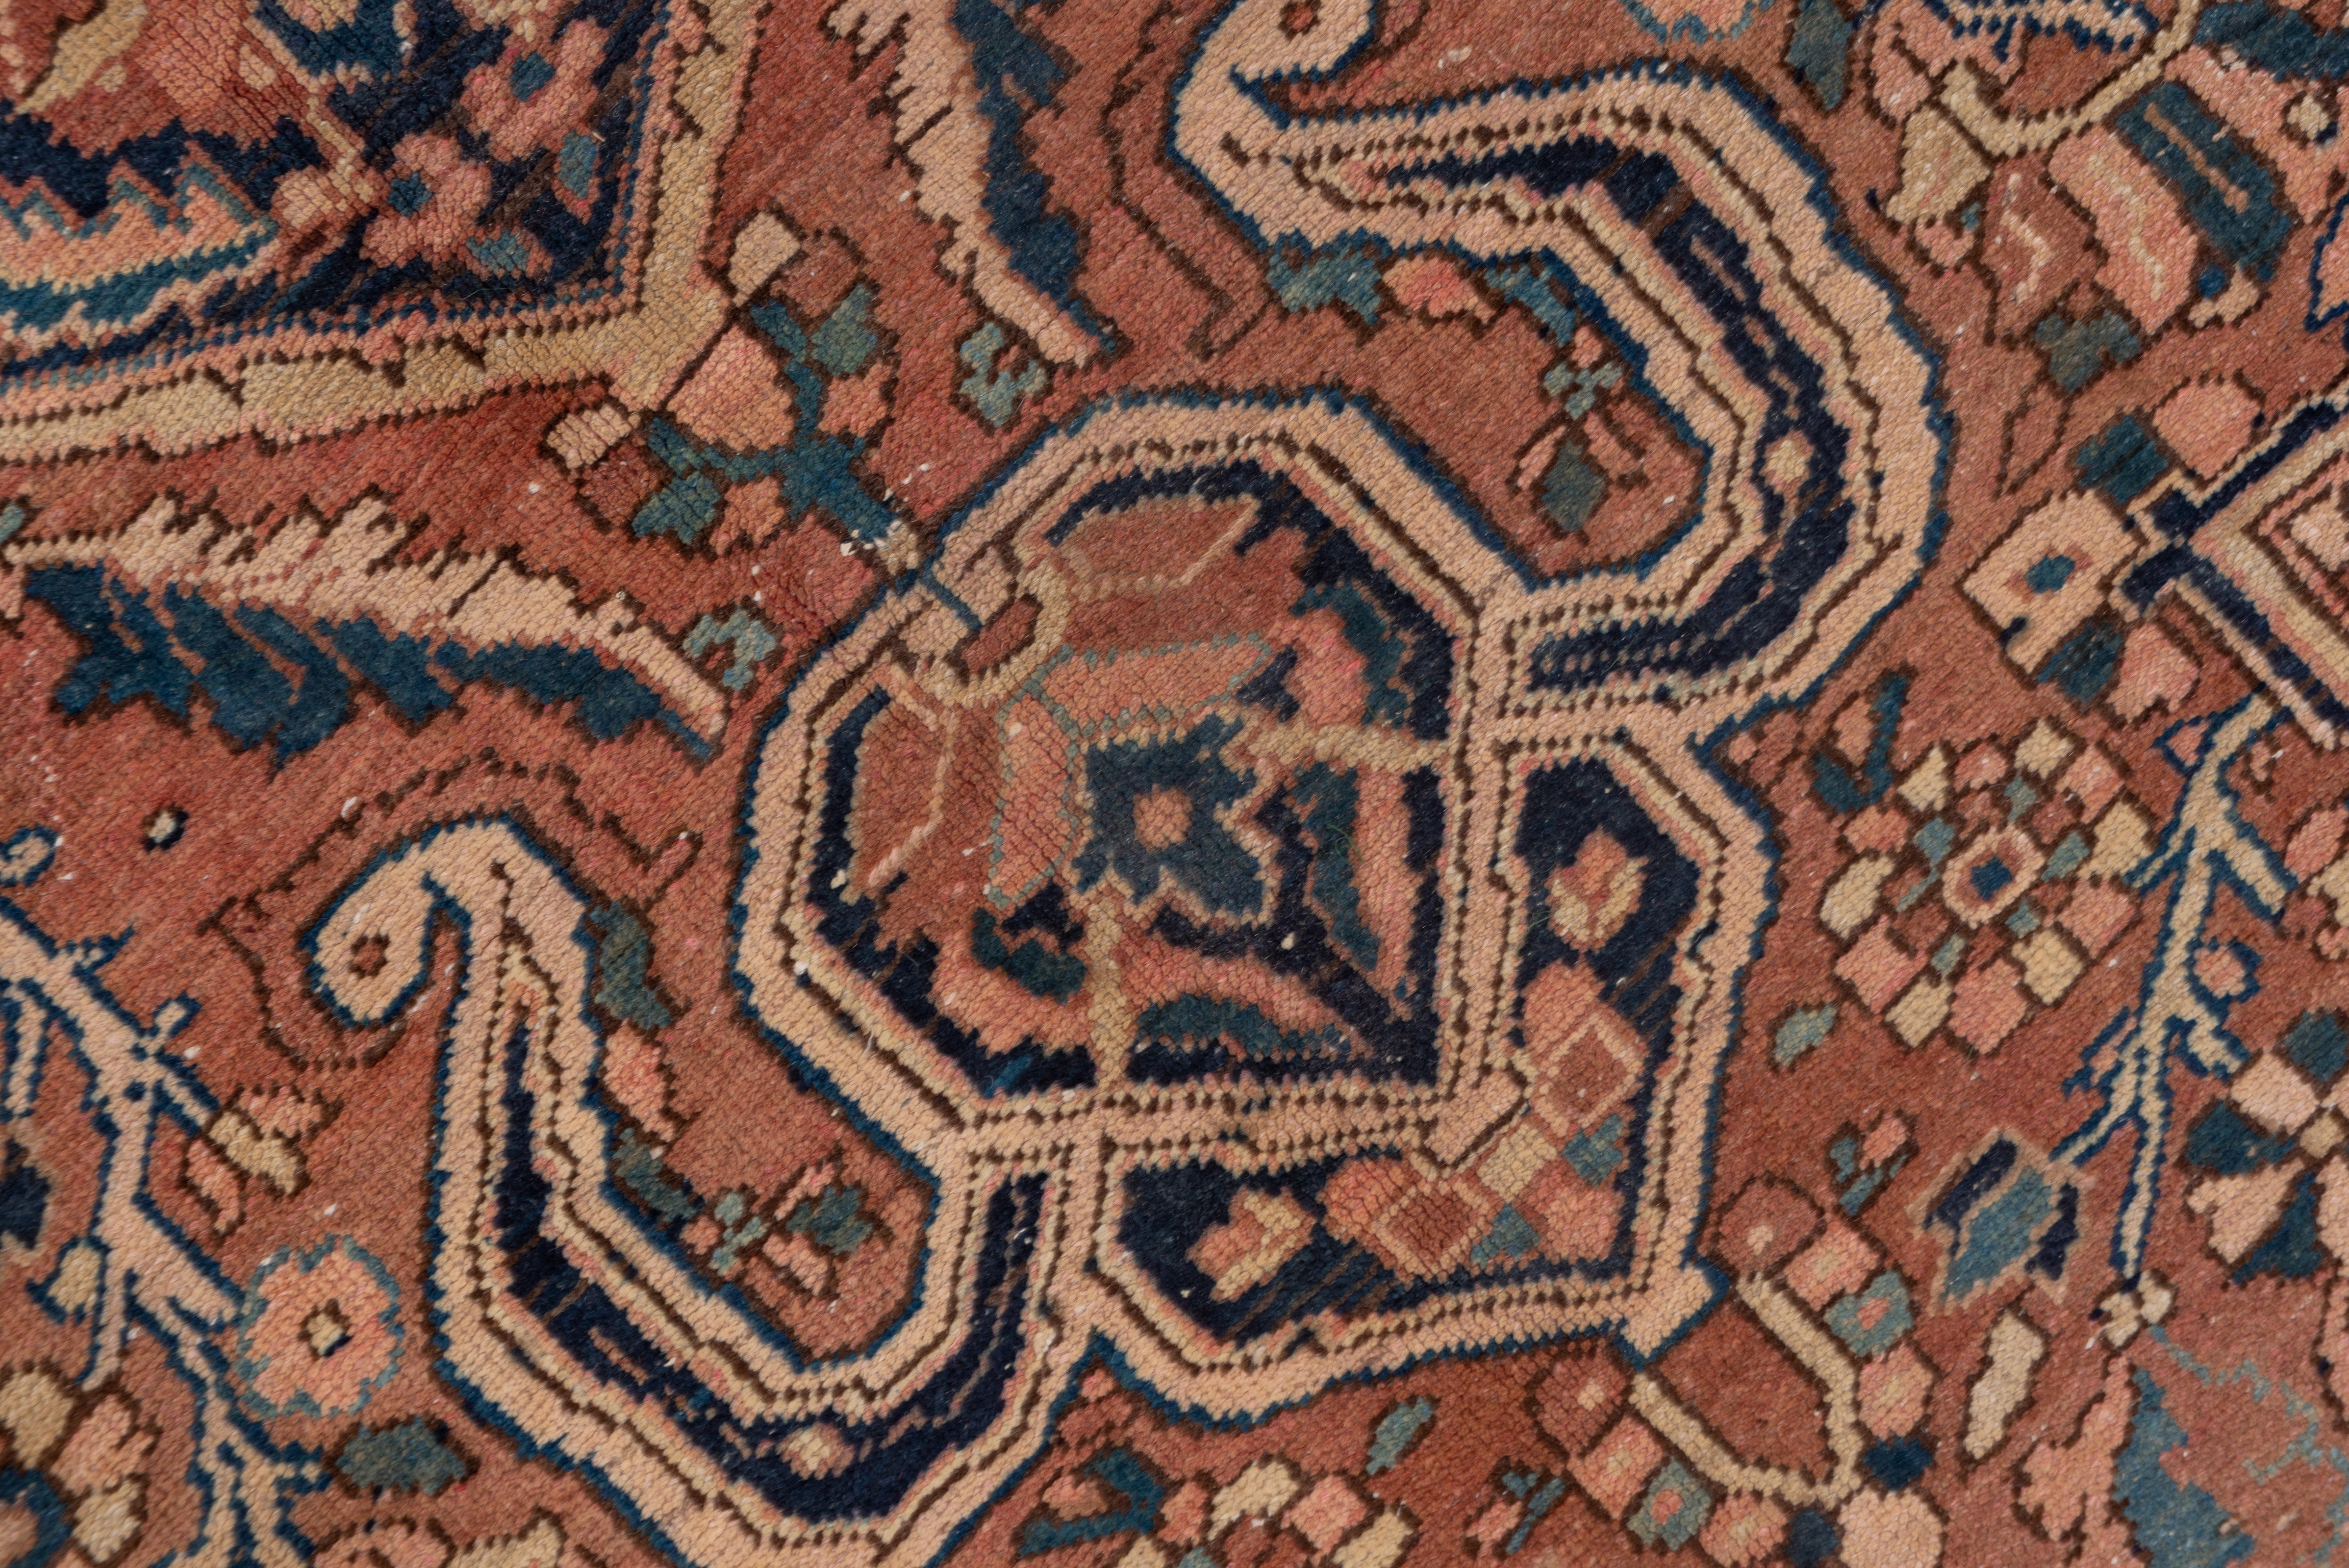 Of Ahar quality, this NW Persian village carpet shows a shaped rose field anchored by a huge navy octofoil medallion. In the ivory corners, the oval palmettes project into the field, locking the composition together. The navy border shows 16-lobe